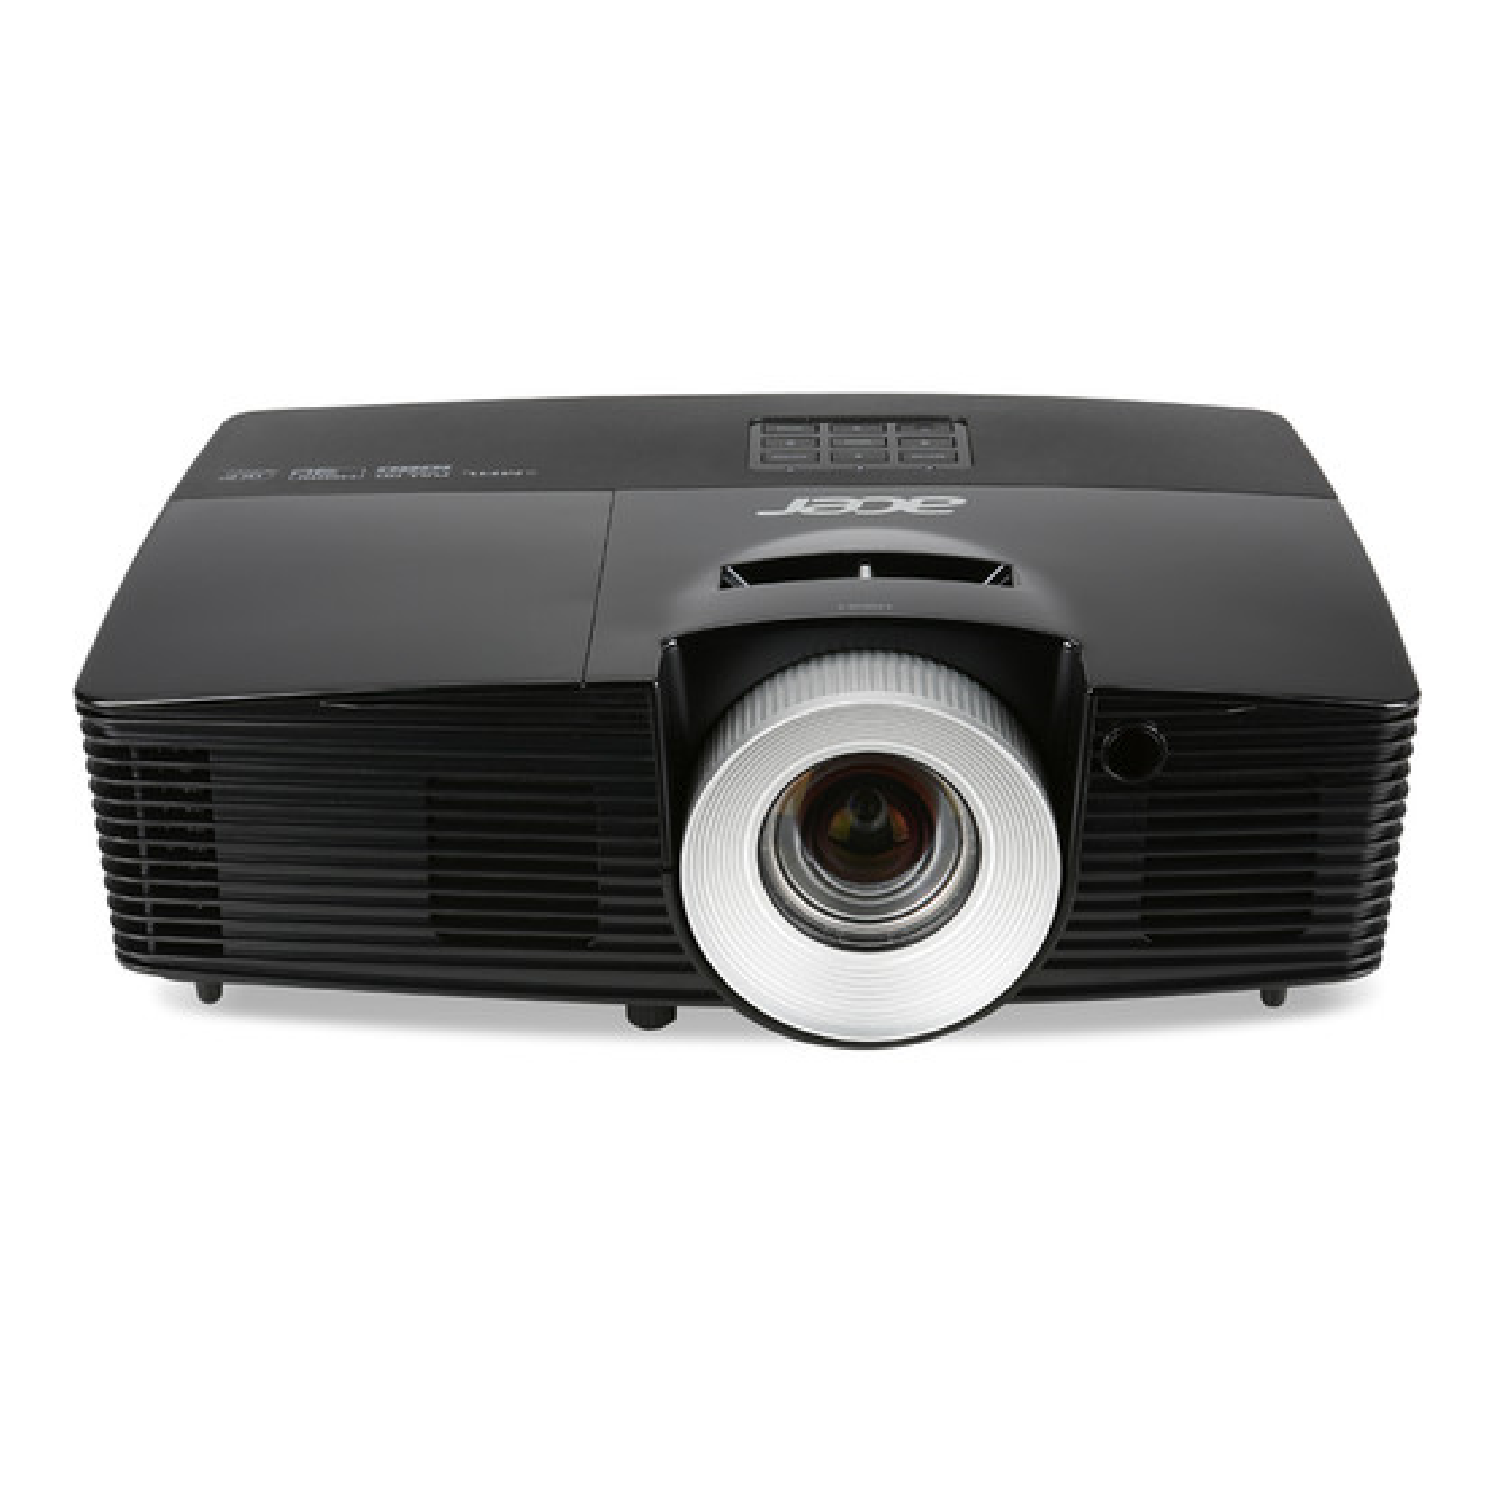 DLP 3D projector with Full HD 1920 x 1080 Native Resolution 4,000 Lumens   P5515 acer